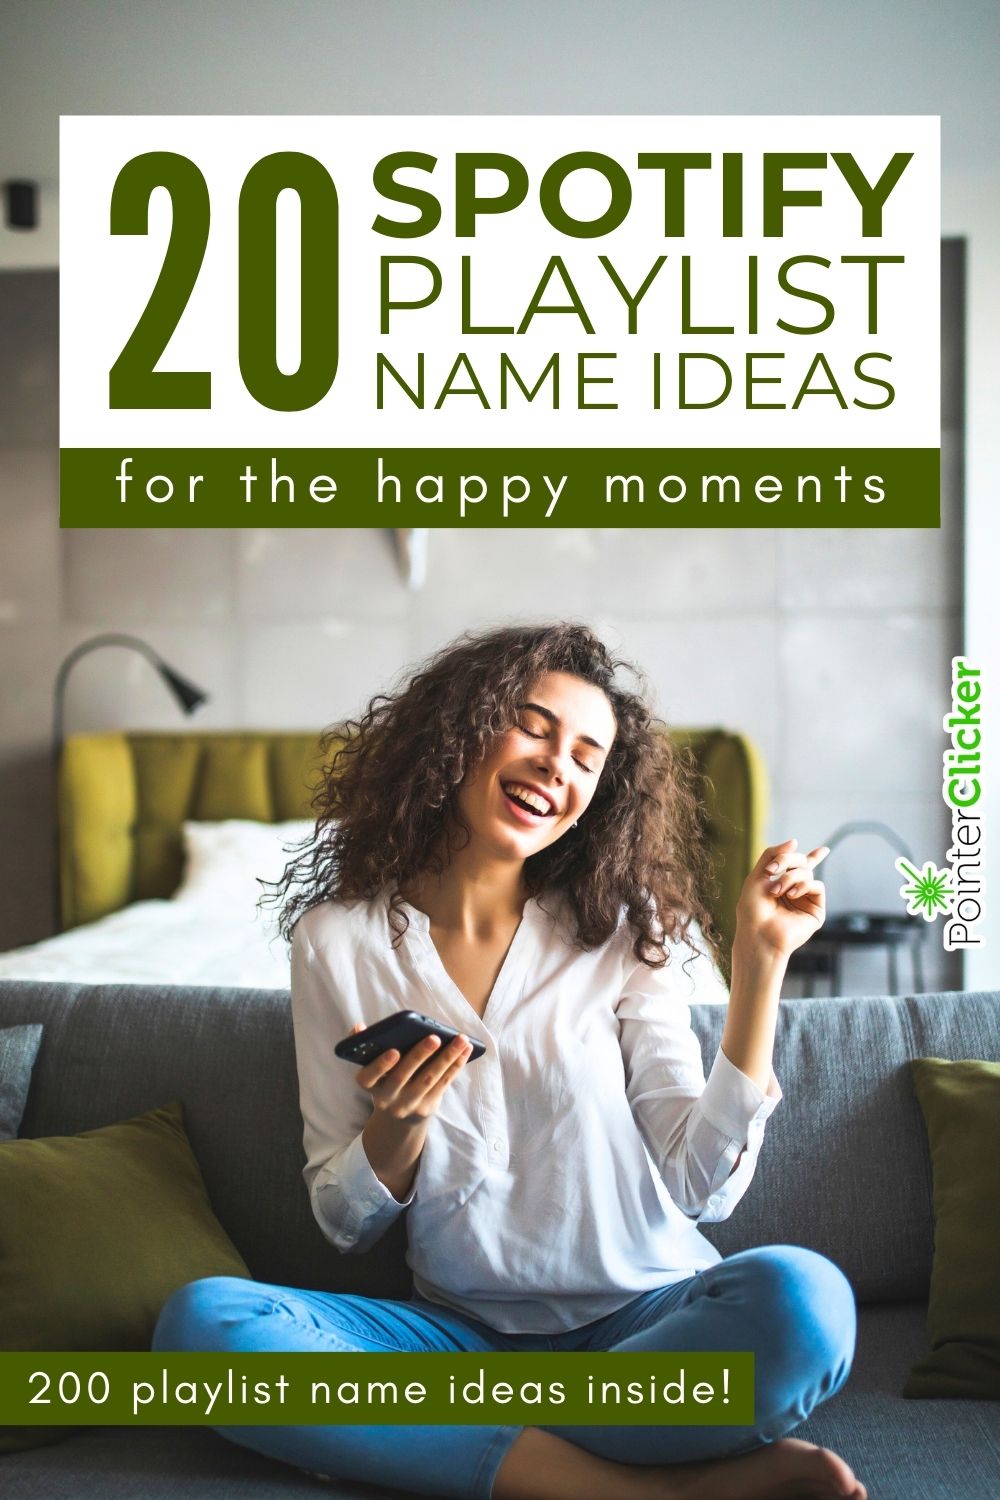 20 spotify playlist name ideas for happy moments